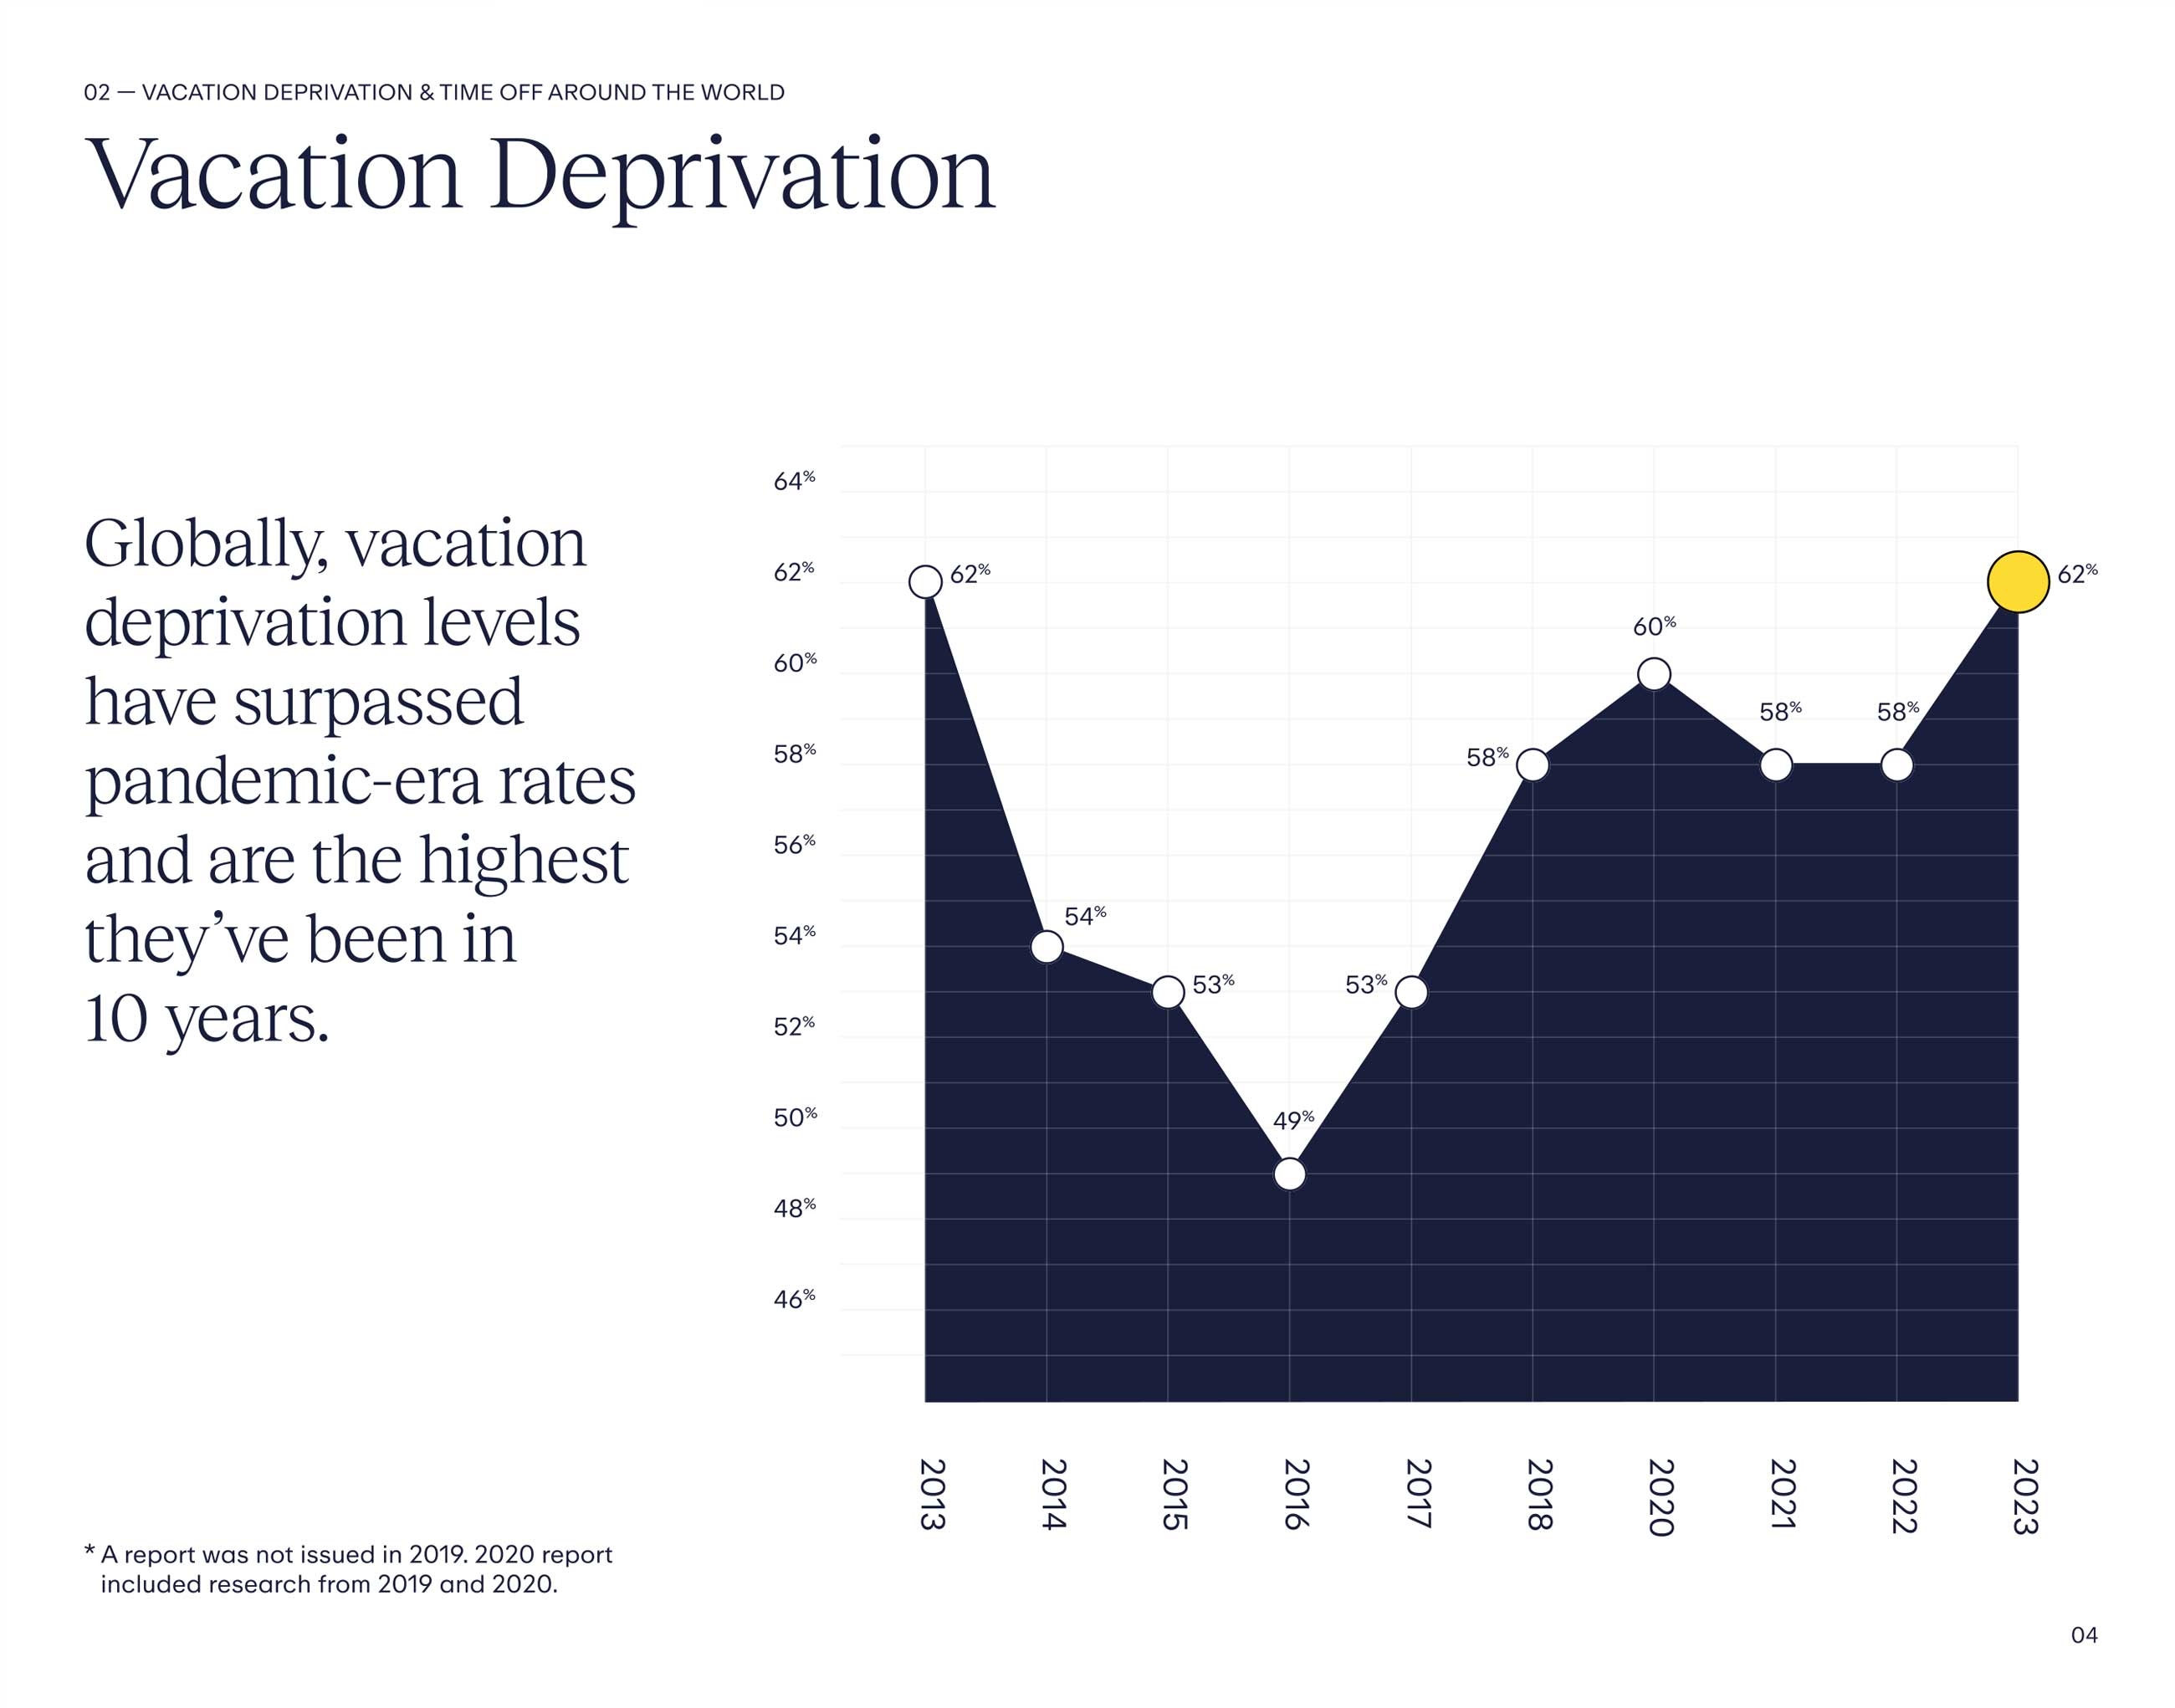 Global vacation deprivation levels are at a 10-year high